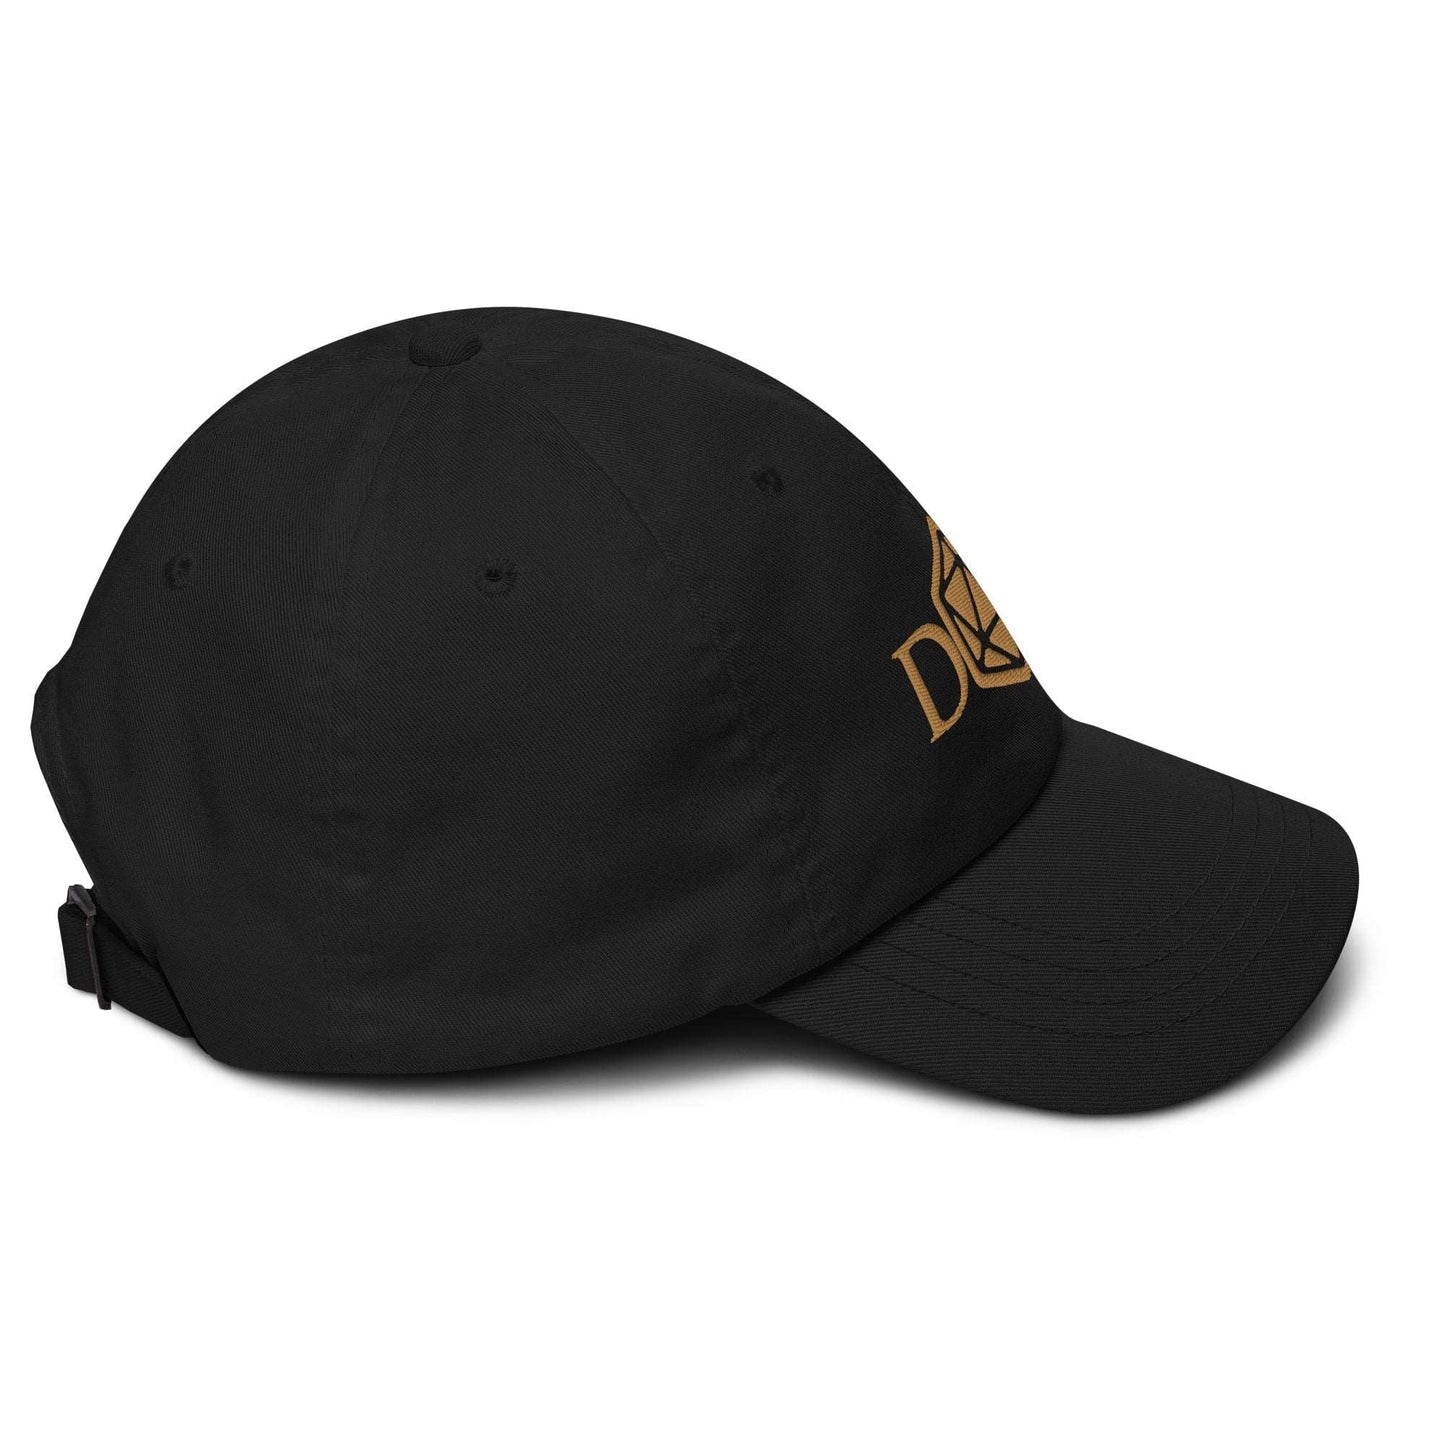 DnD Dad Embroidered Hat - D20 Cap for Gaming Fathers Hat